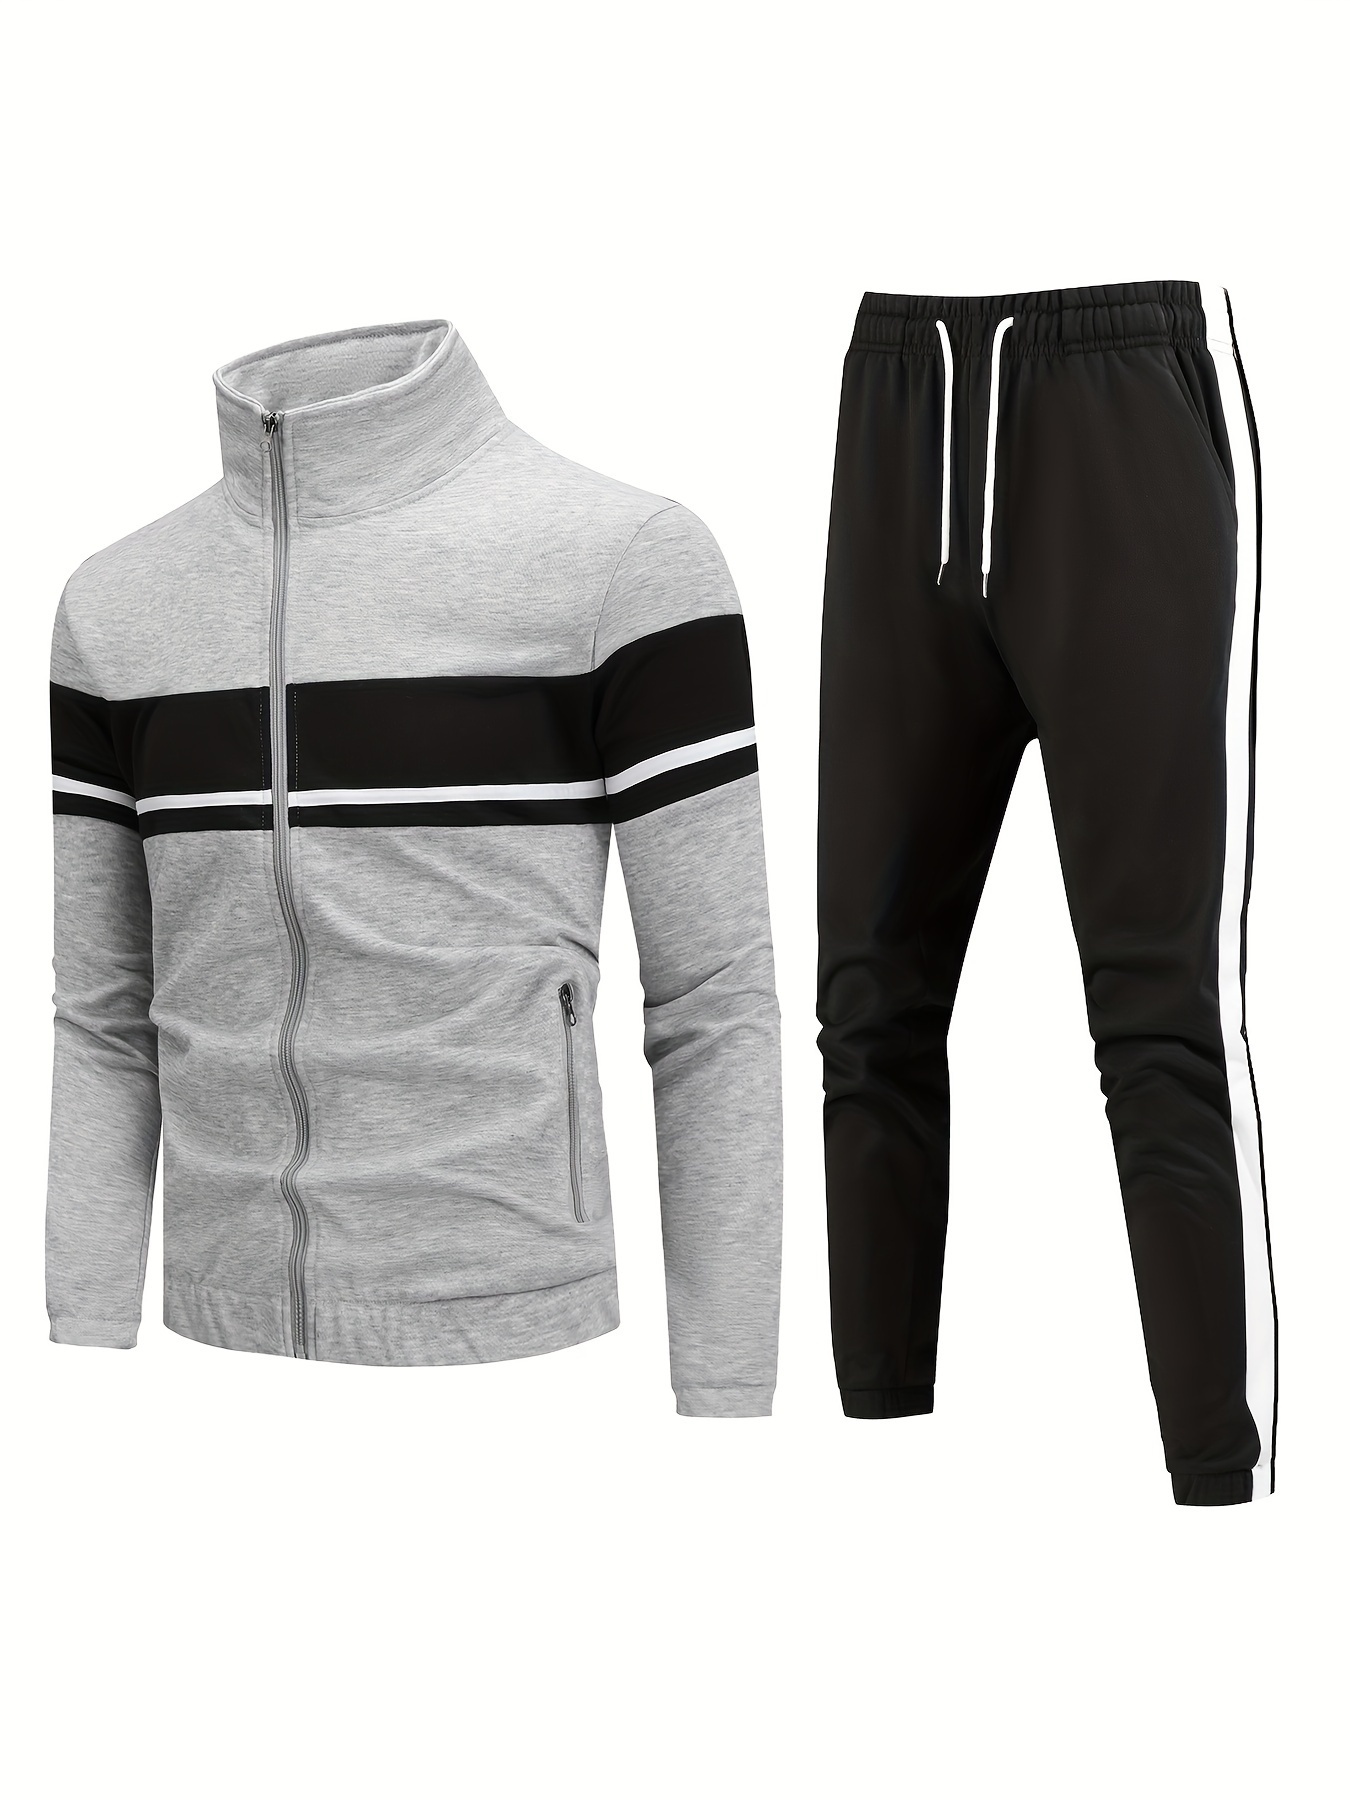 Sports Tracksuit for Men's Athletic Full Zip Casual Jogging Gym